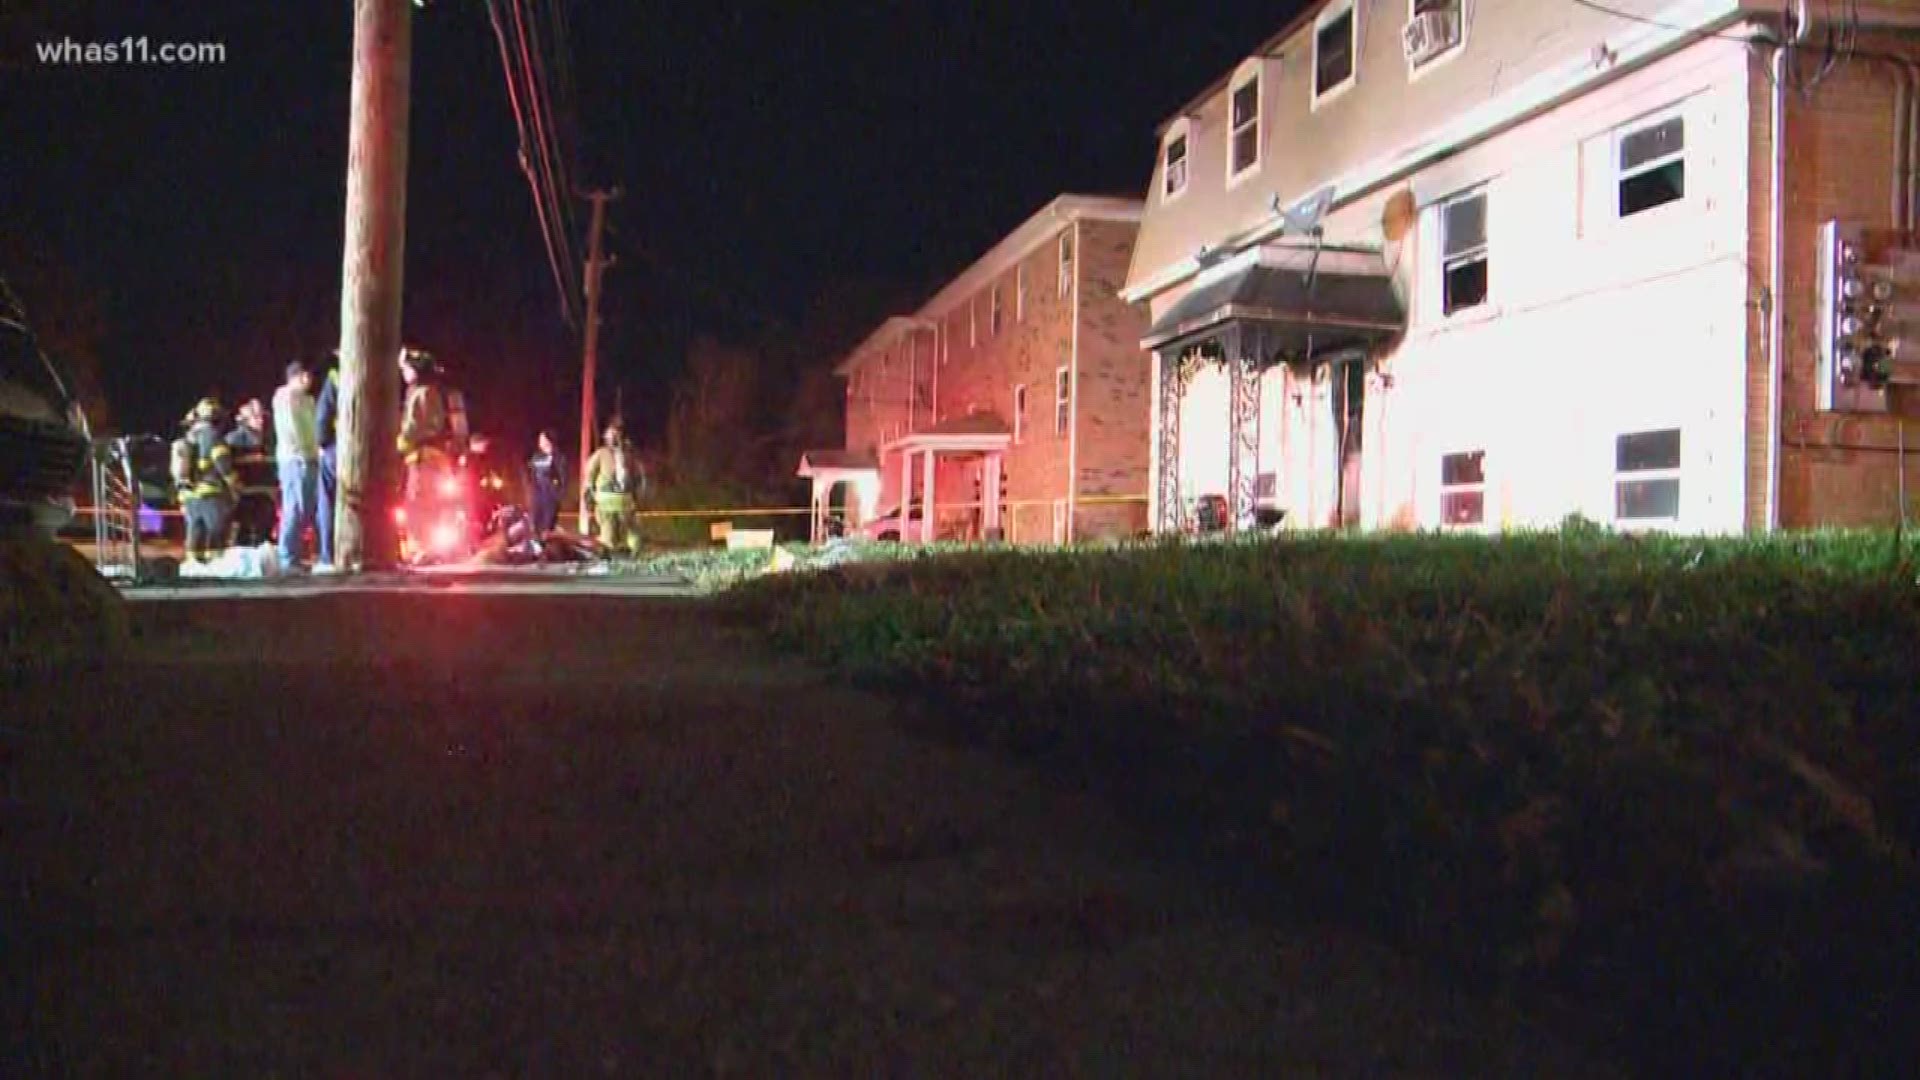 Less than 48 hours after a fire took two lives, a Louisville woman is being blamed for their deaths.